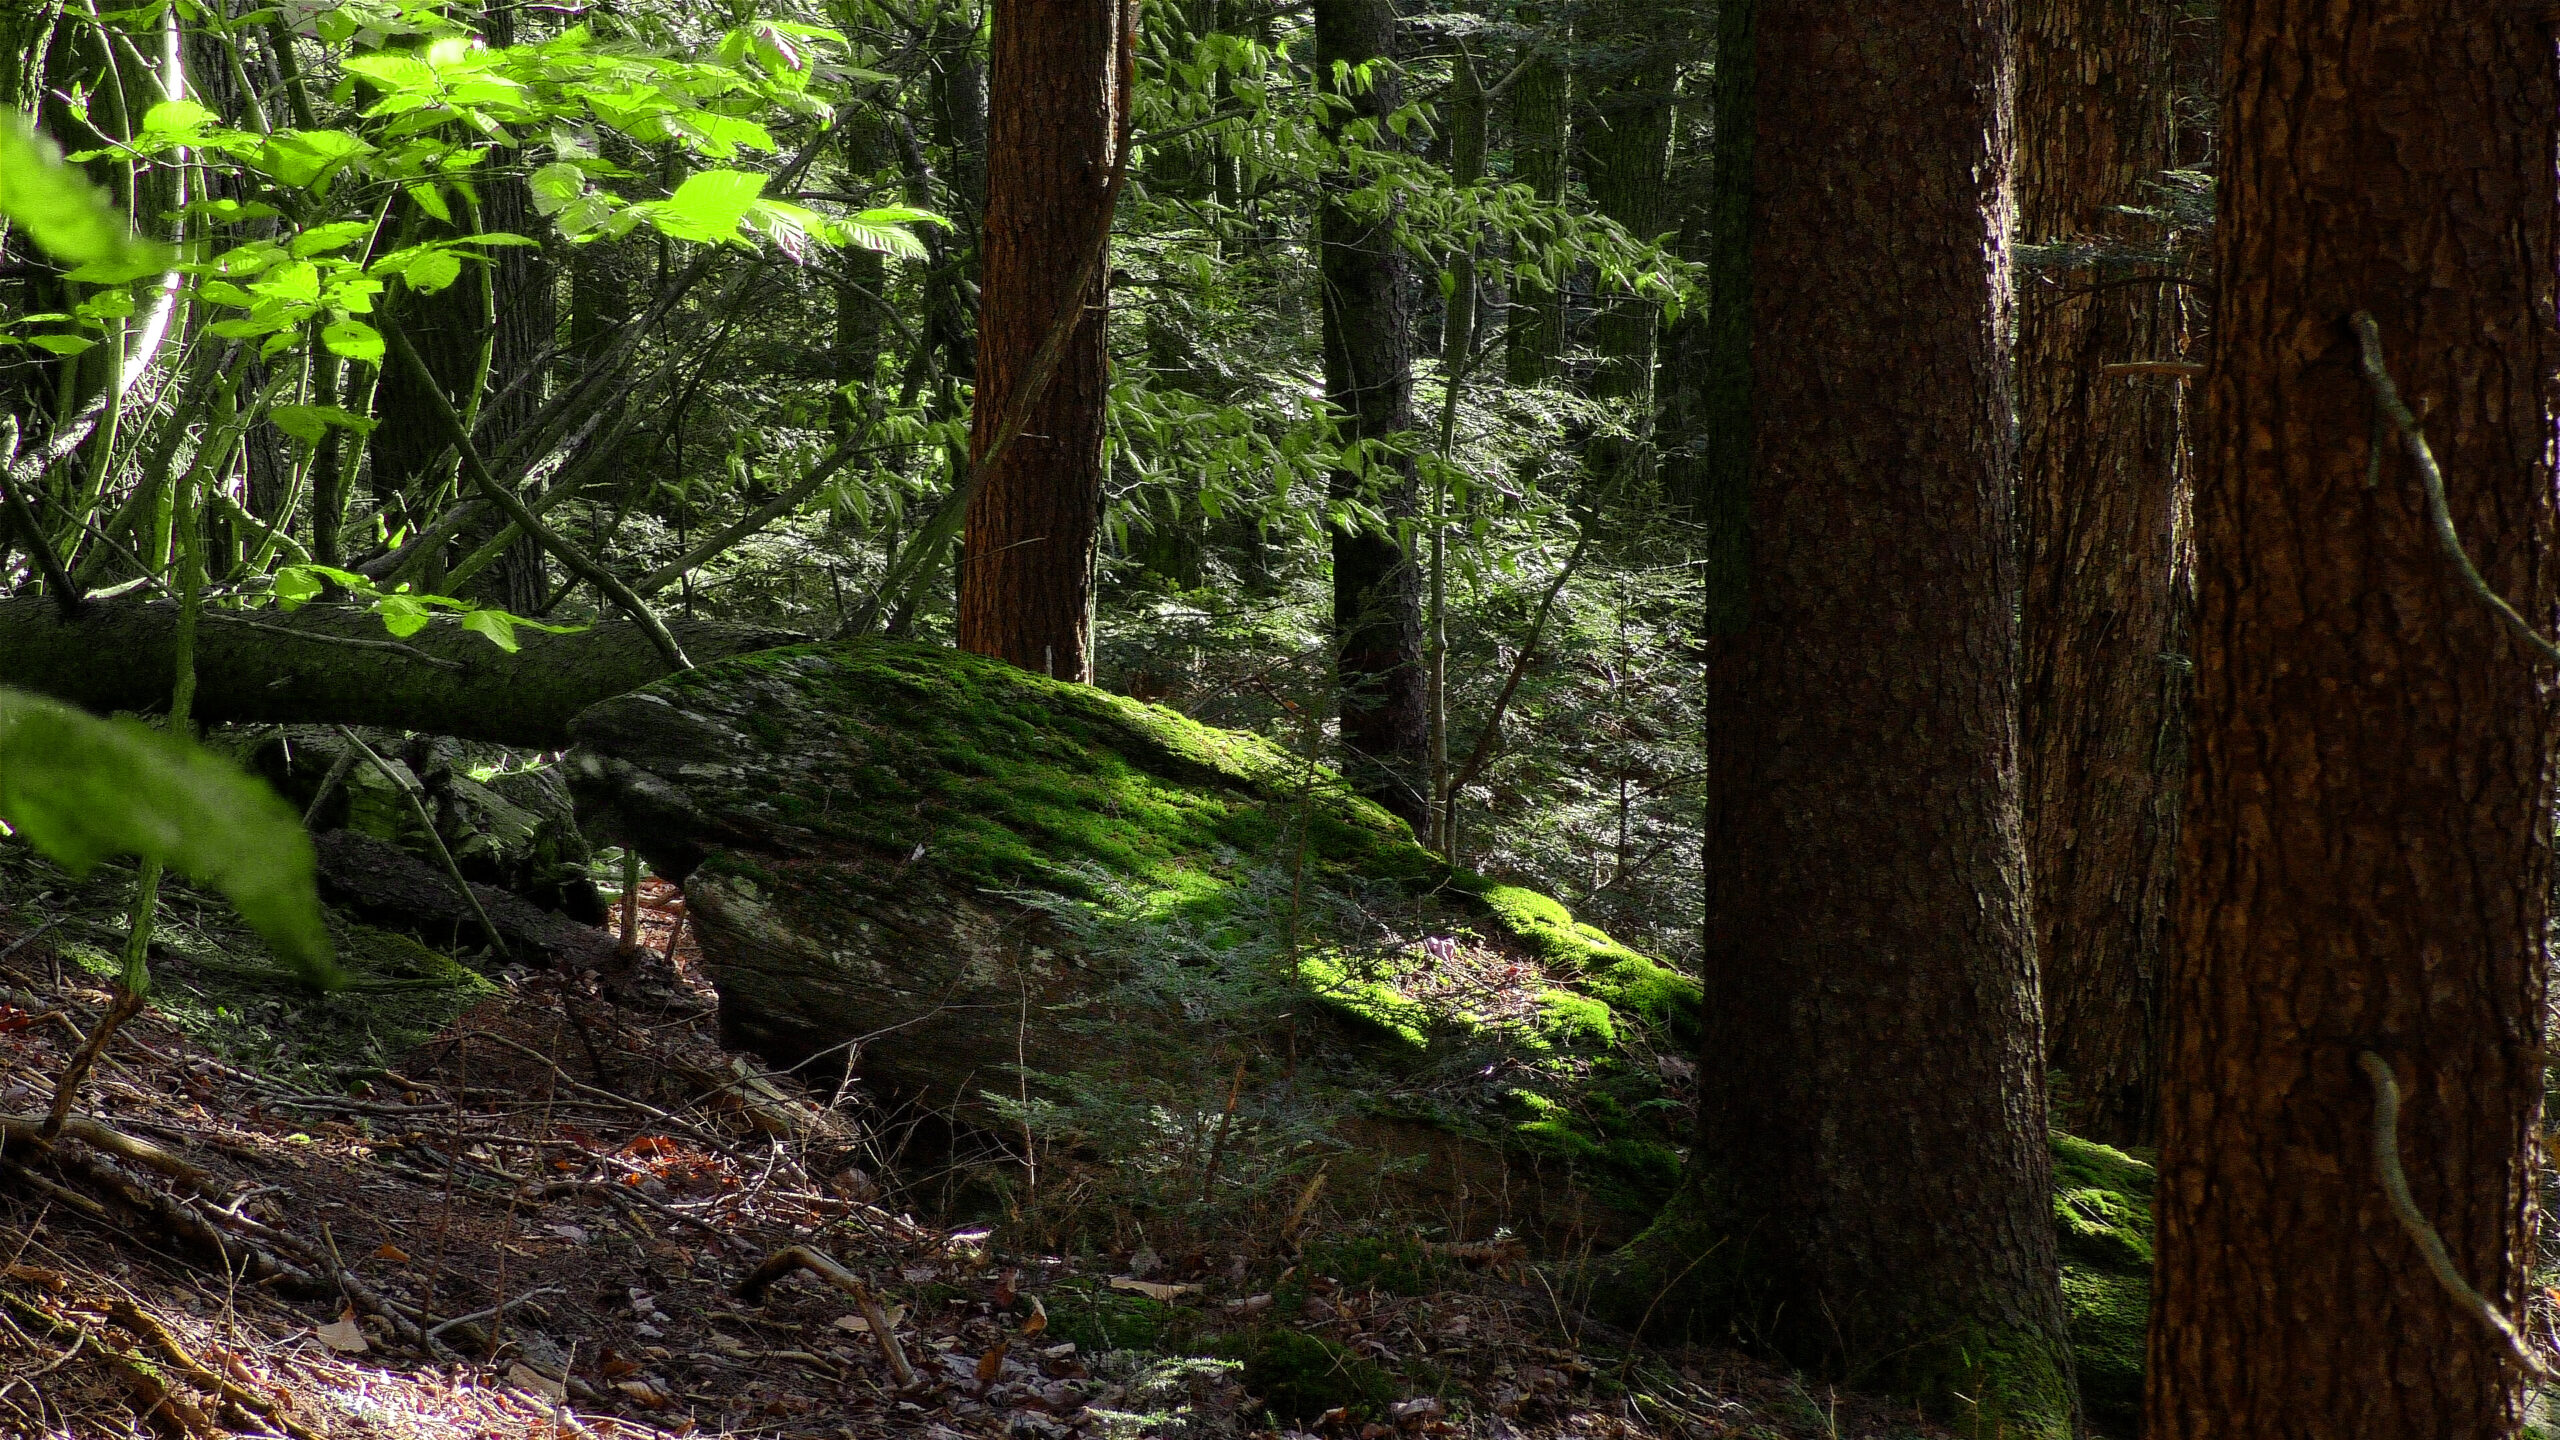 Film: “The Return of Old Growth Forests” – New England Forest